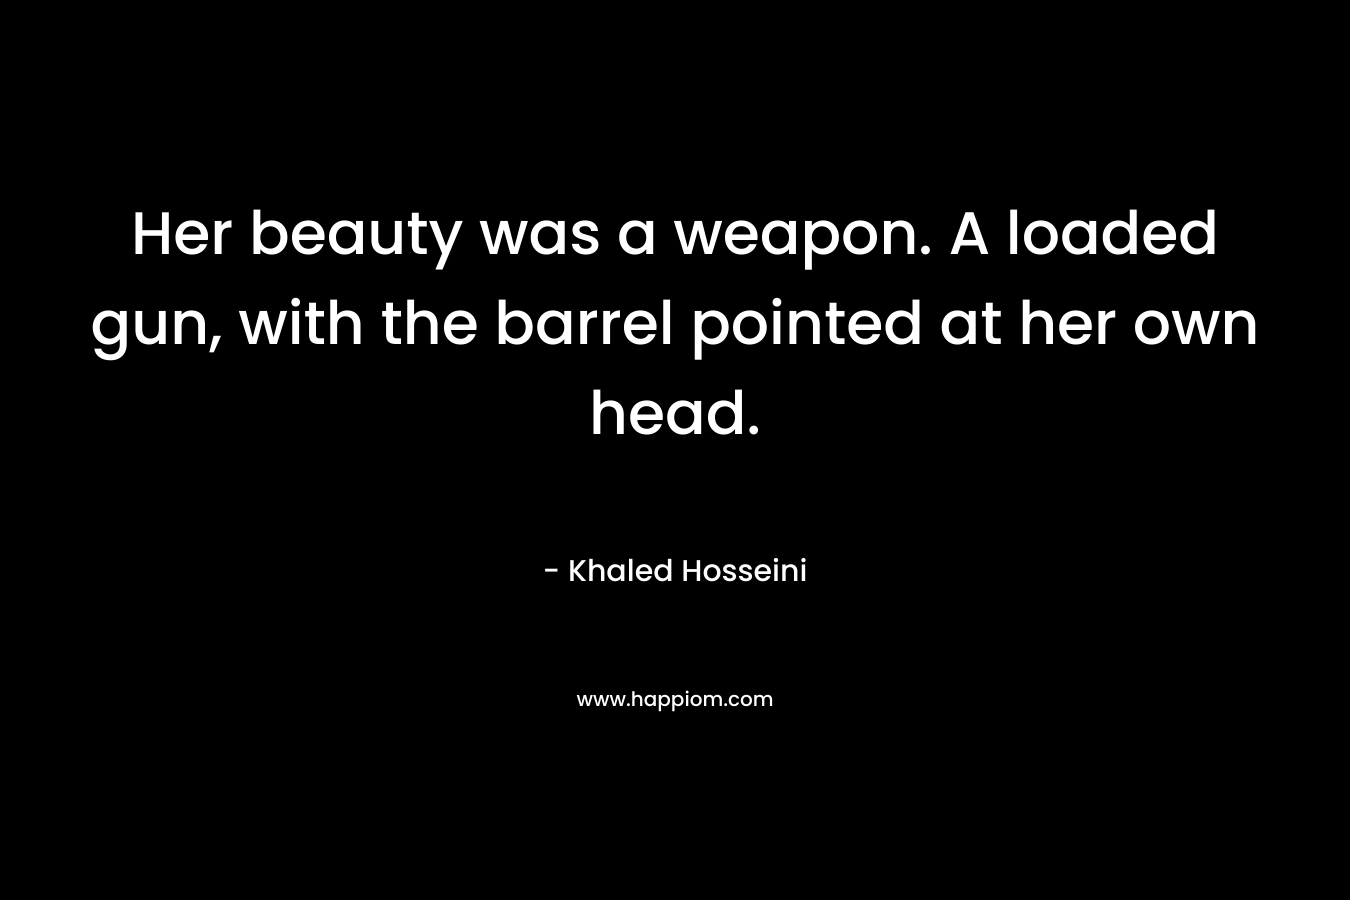 Her beauty was a weapon. A loaded gun, with the barrel pointed at her own head. – Khaled Hosseini